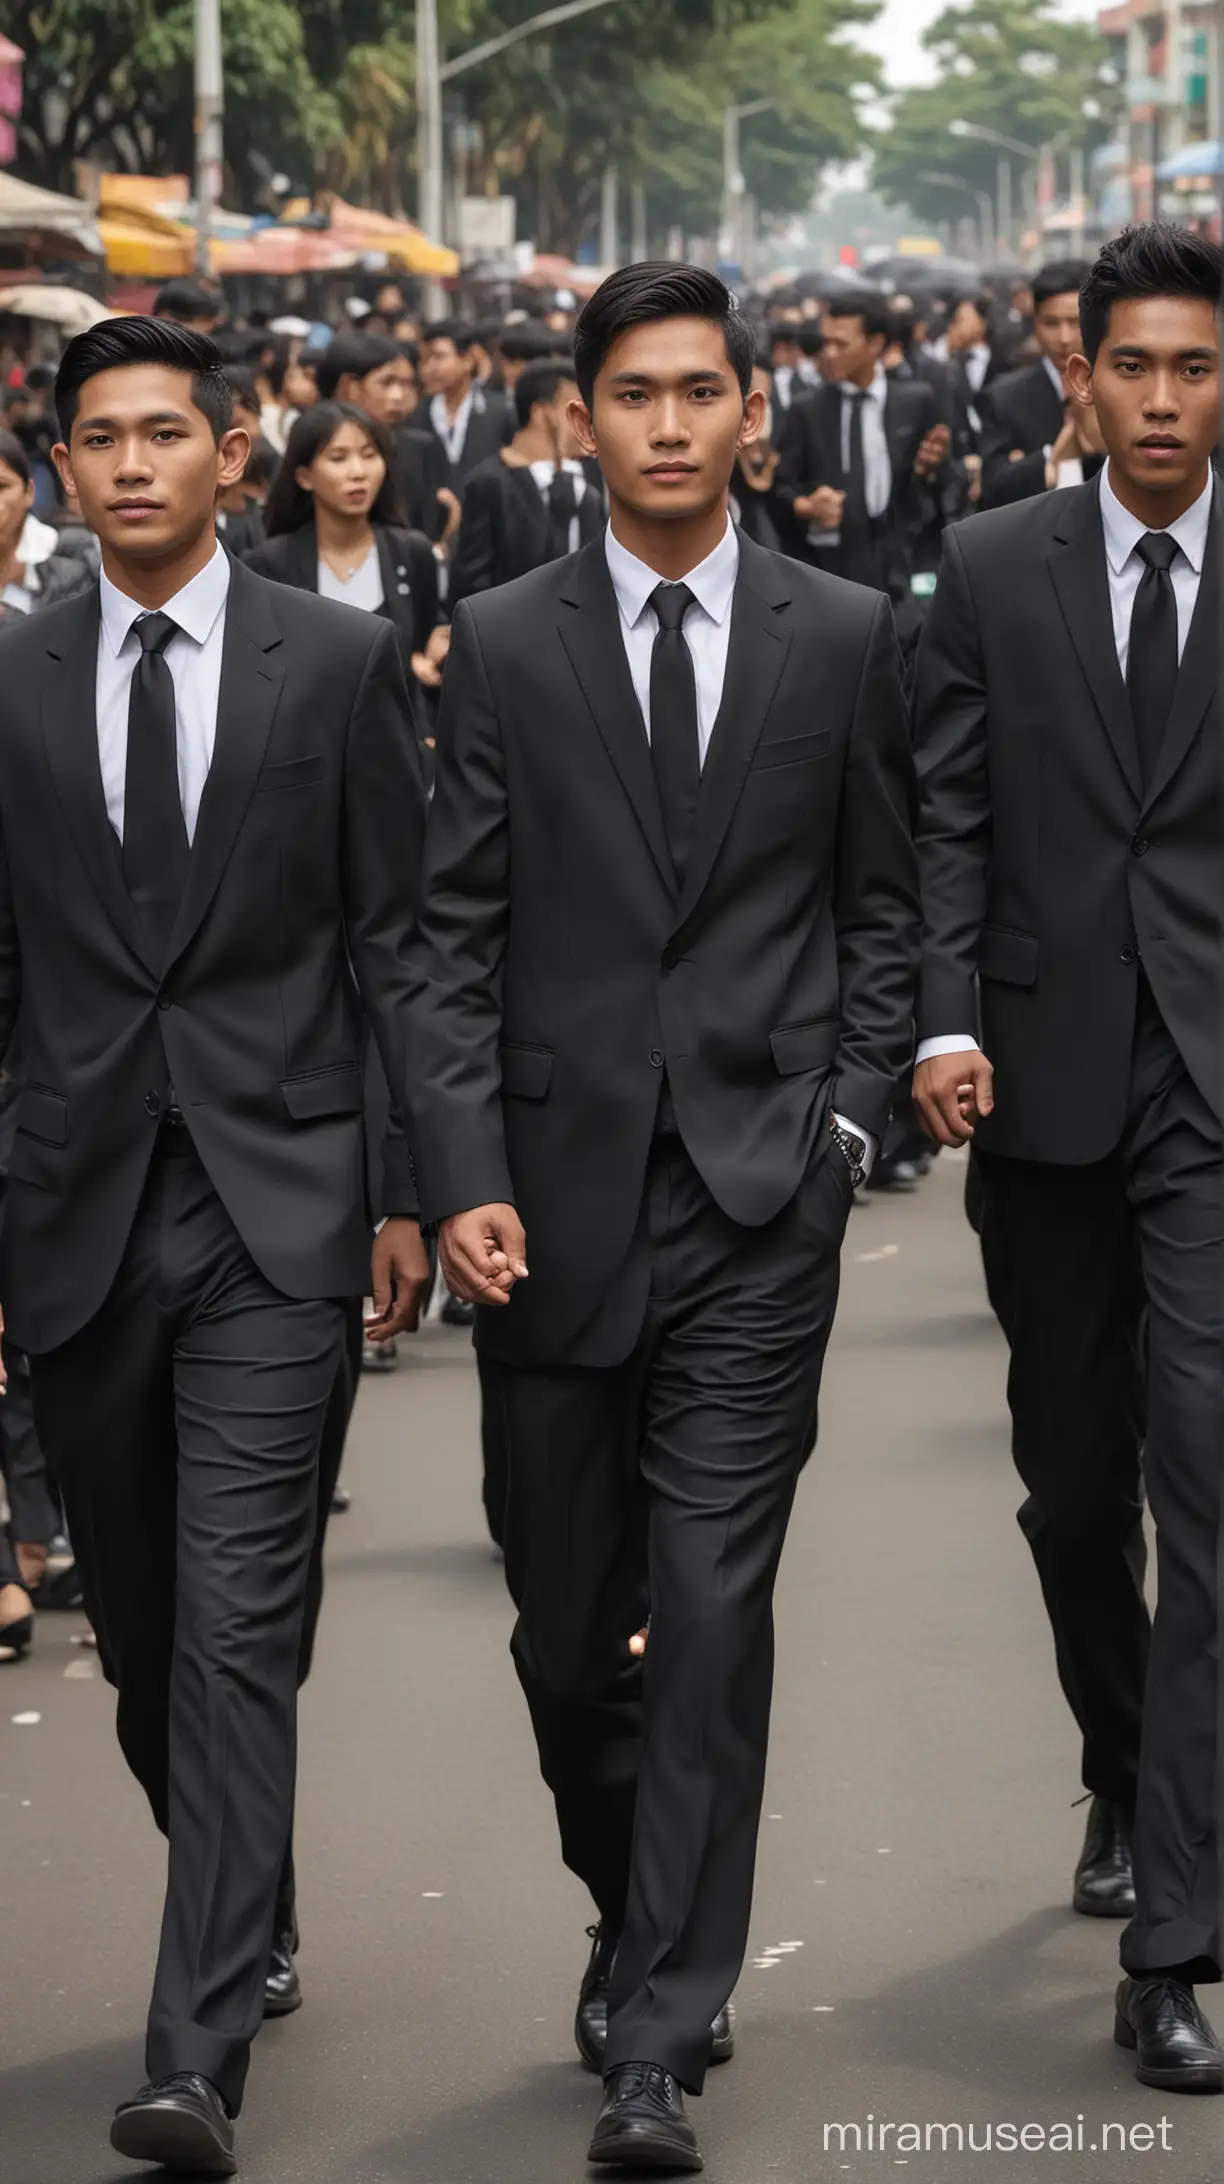 Stylish Indonesian Man Leading Group in Black Suits Through Urban Crowd